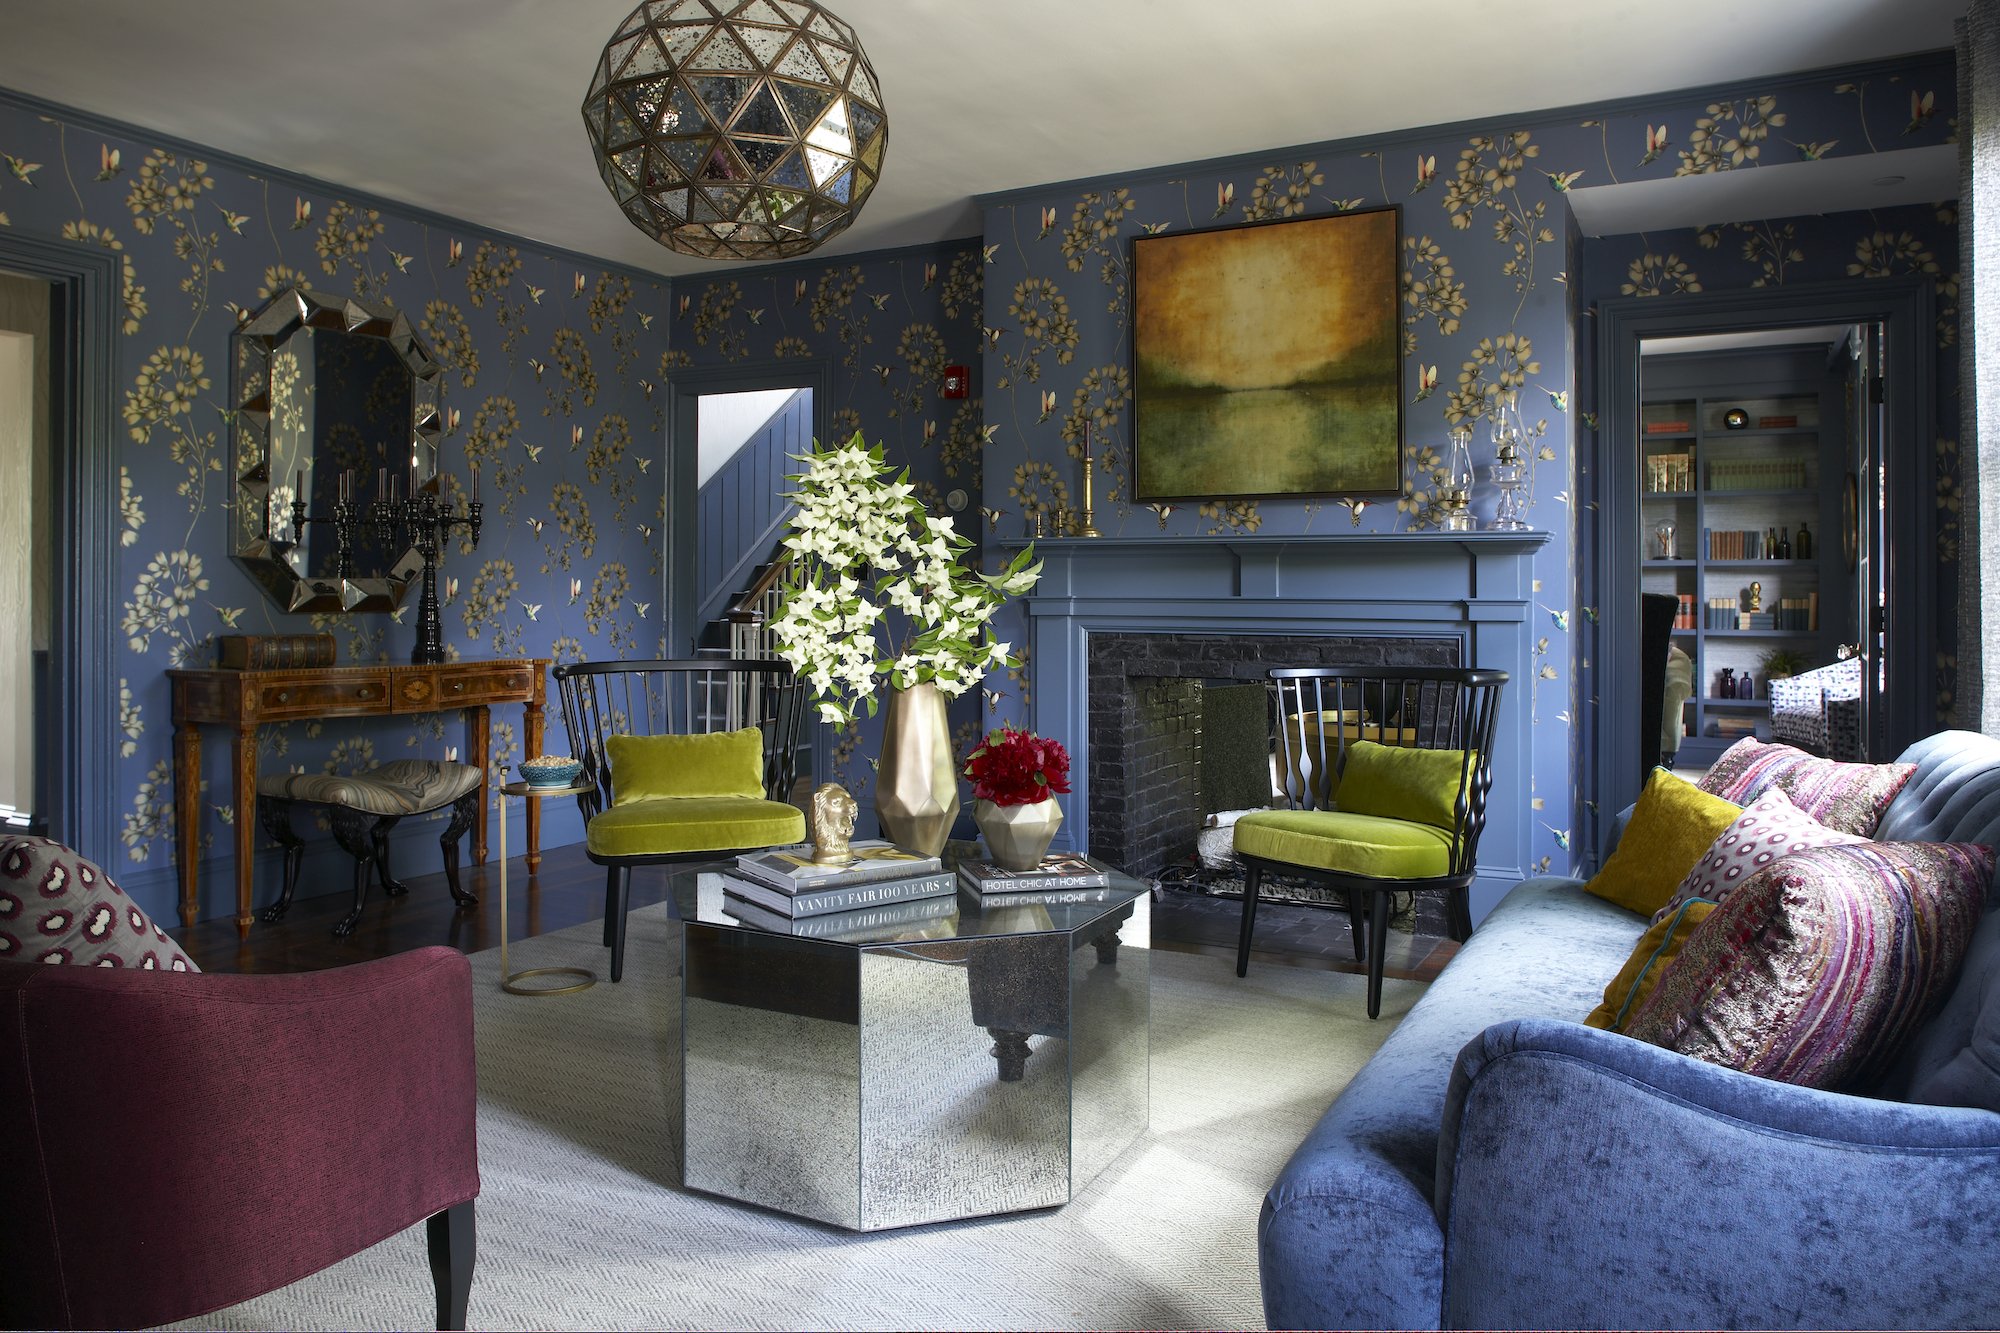 Posh Hotel With Vibrant Colors and Bold Patterns, Rachel Reider Interiors